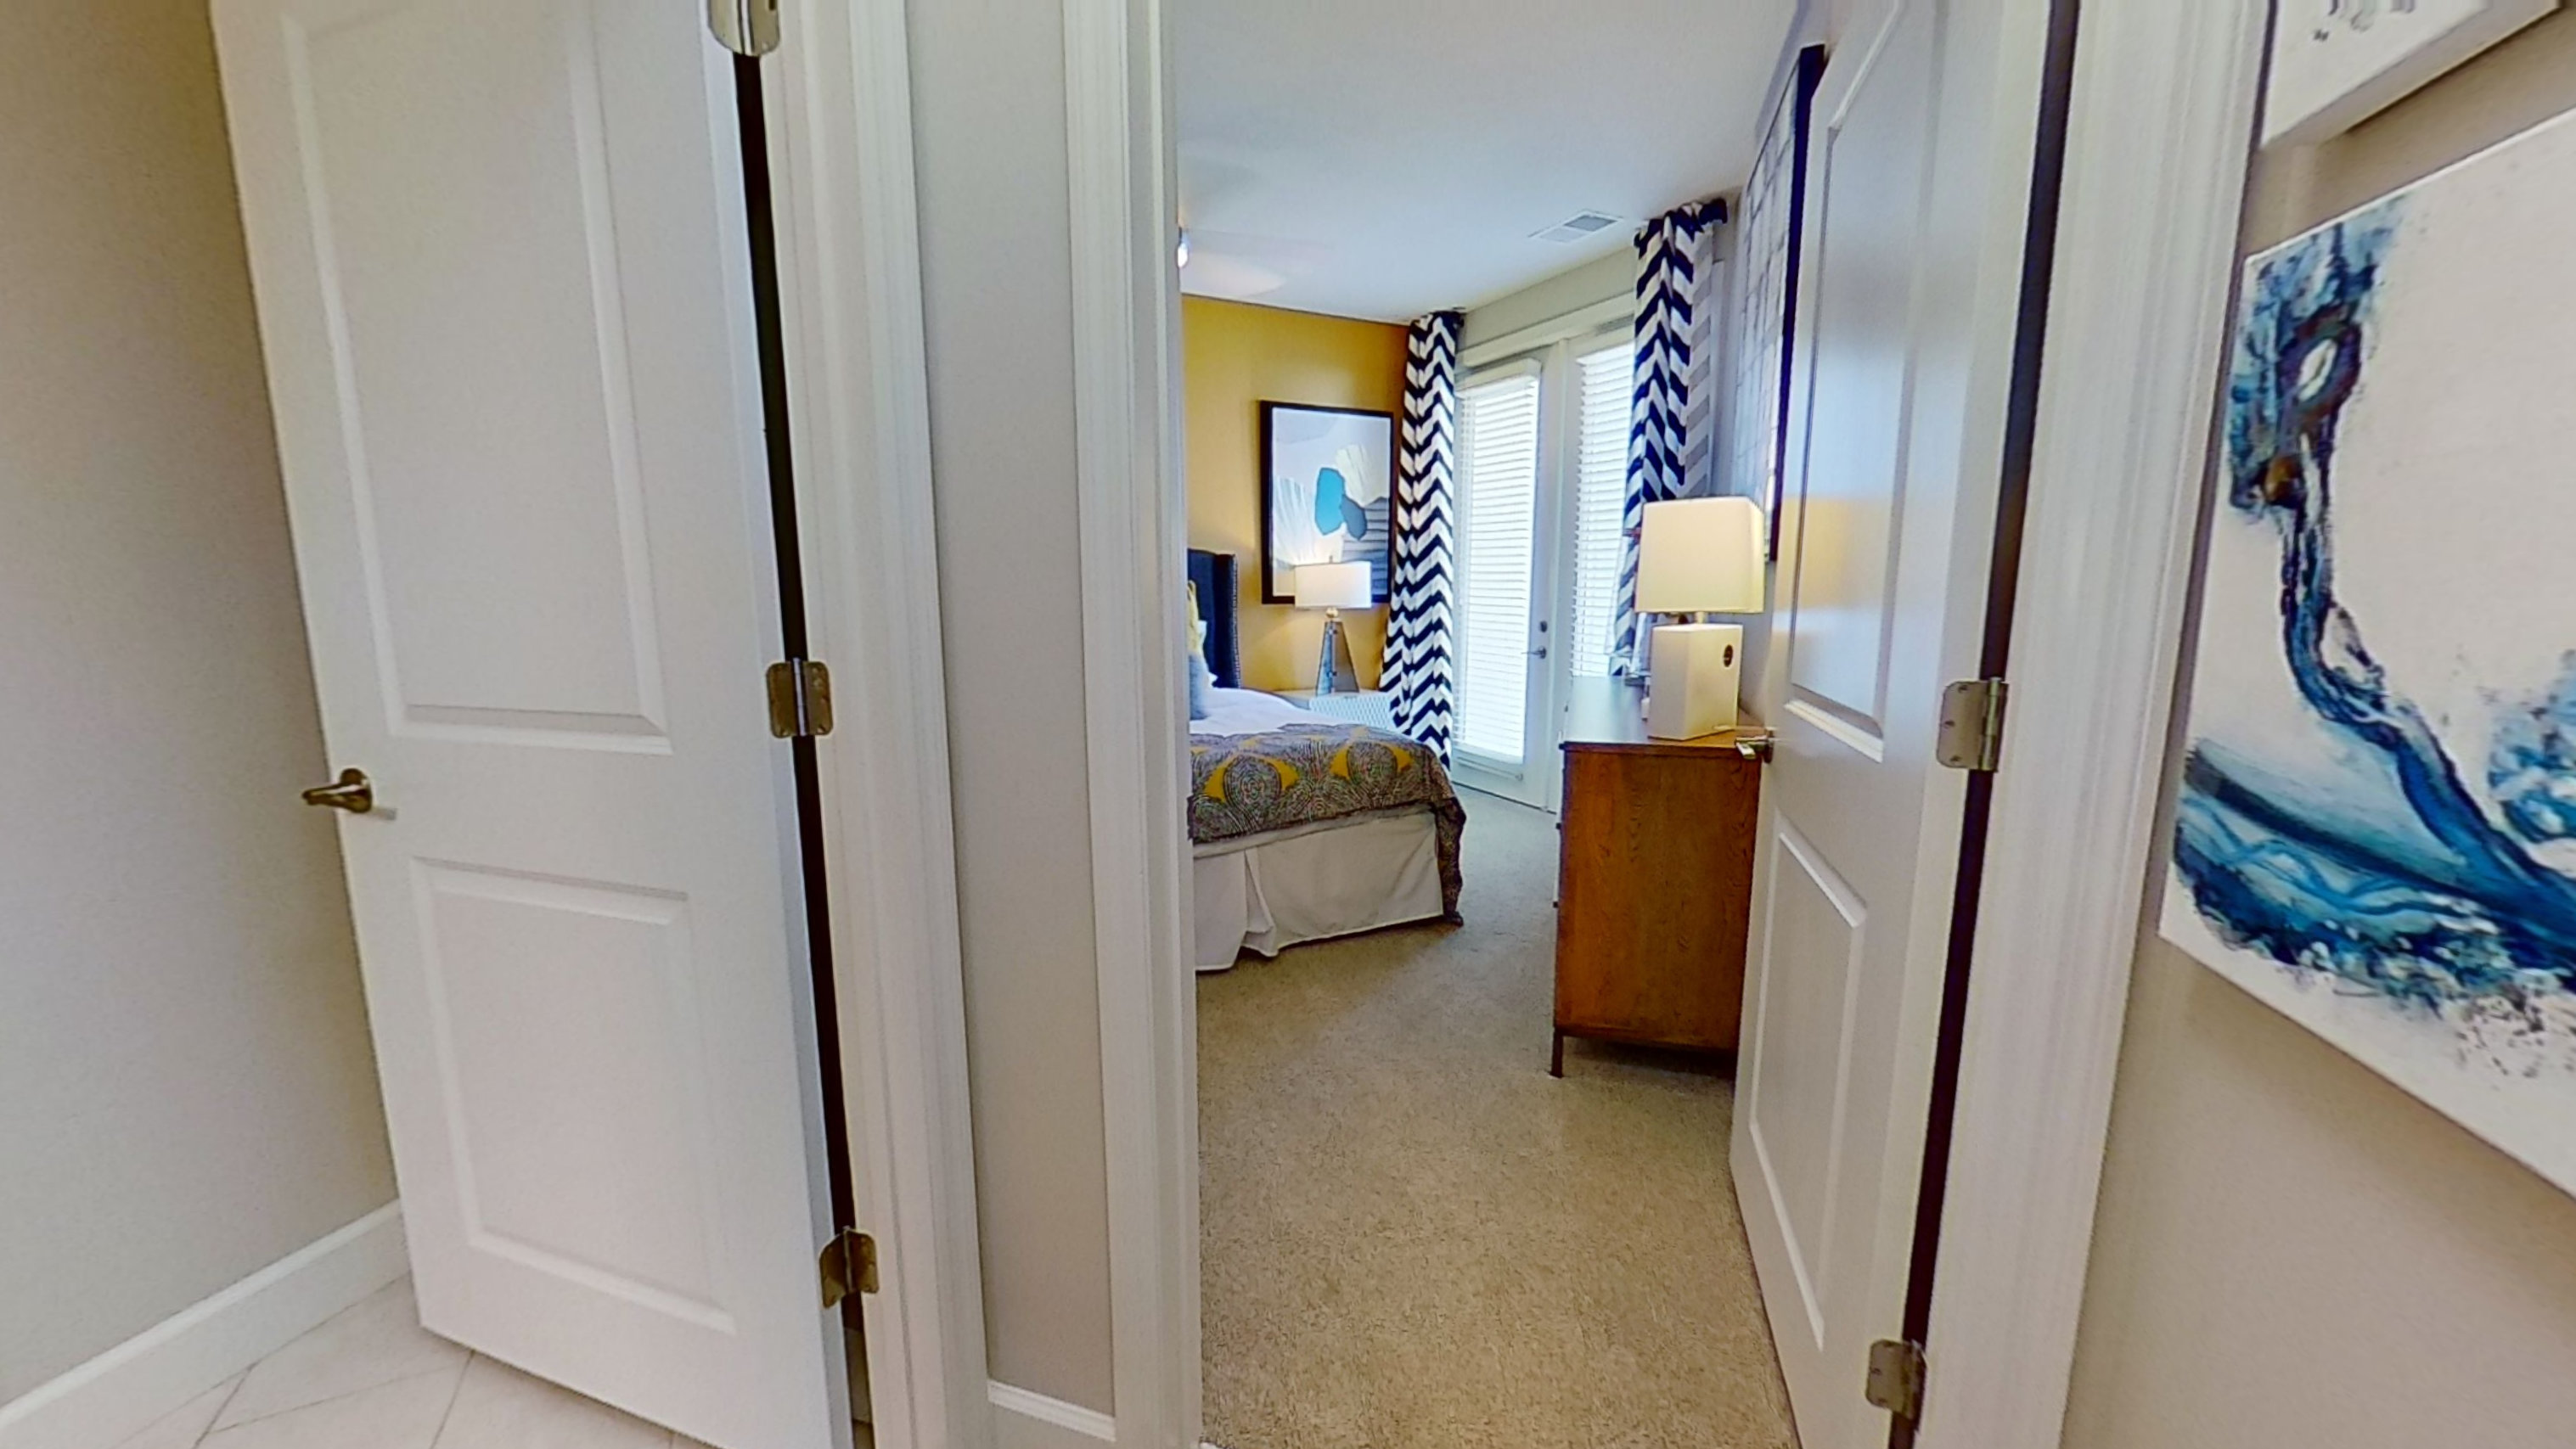 A3 Unit Interior at the Vue at Creve Coeur Apartments in Creve Coeur, MO